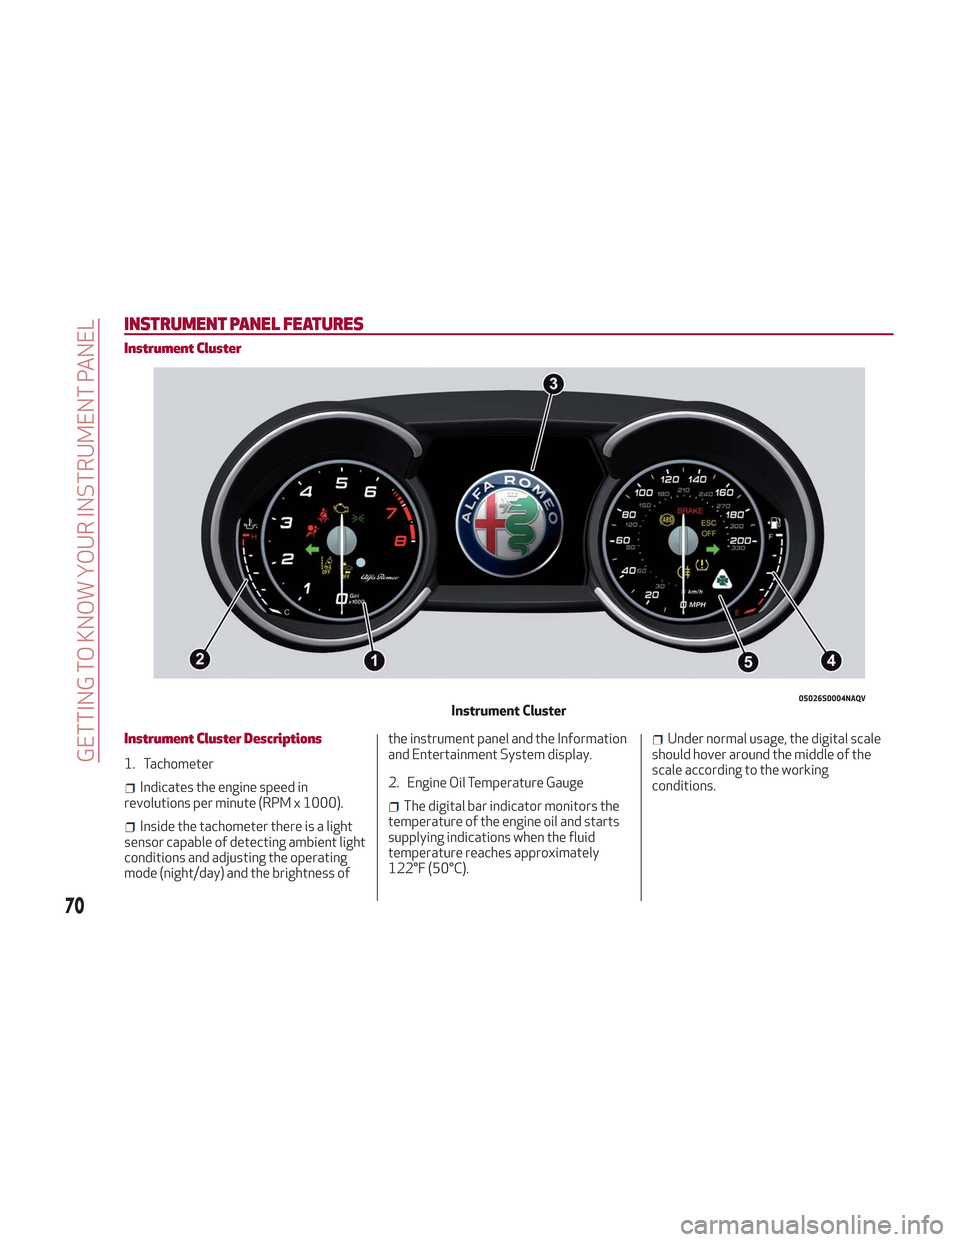 Alfa Romeo Stelvio 2018  Owners Manual INSTRUMENT PANEL FEATURES
Instrument Cluster
Instrument Cluster Descriptions
1. Tachometer
Indicates the engine speed in
revolutions per minute (RPM x 1000).
Inside the tachometer there is a light
sen